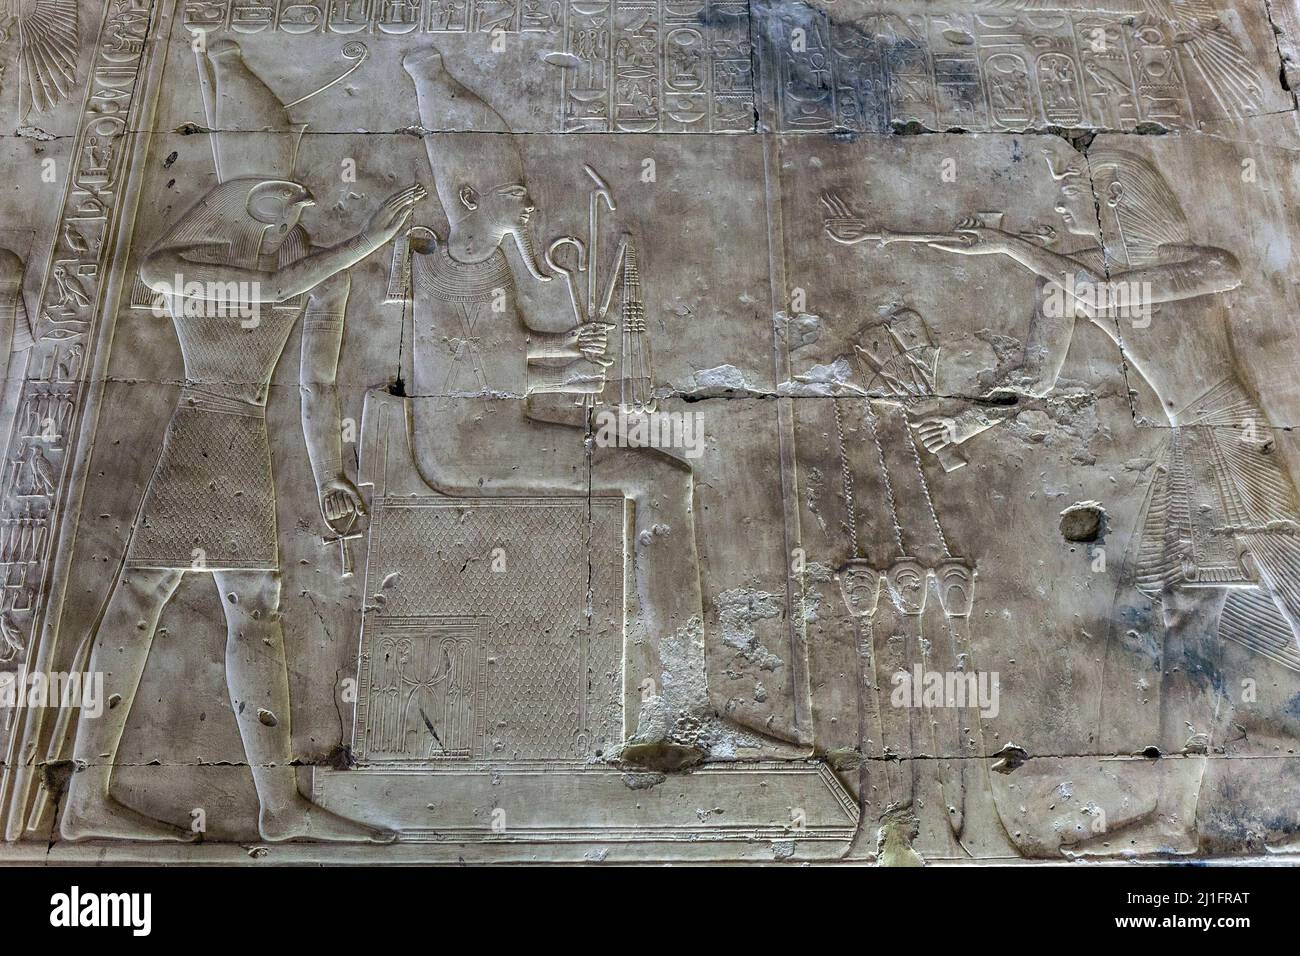 Stone carving of King Seti I offering incense to the deities Osiris and Horus in the Great Temple of Abydos, Egypt Stock Photo